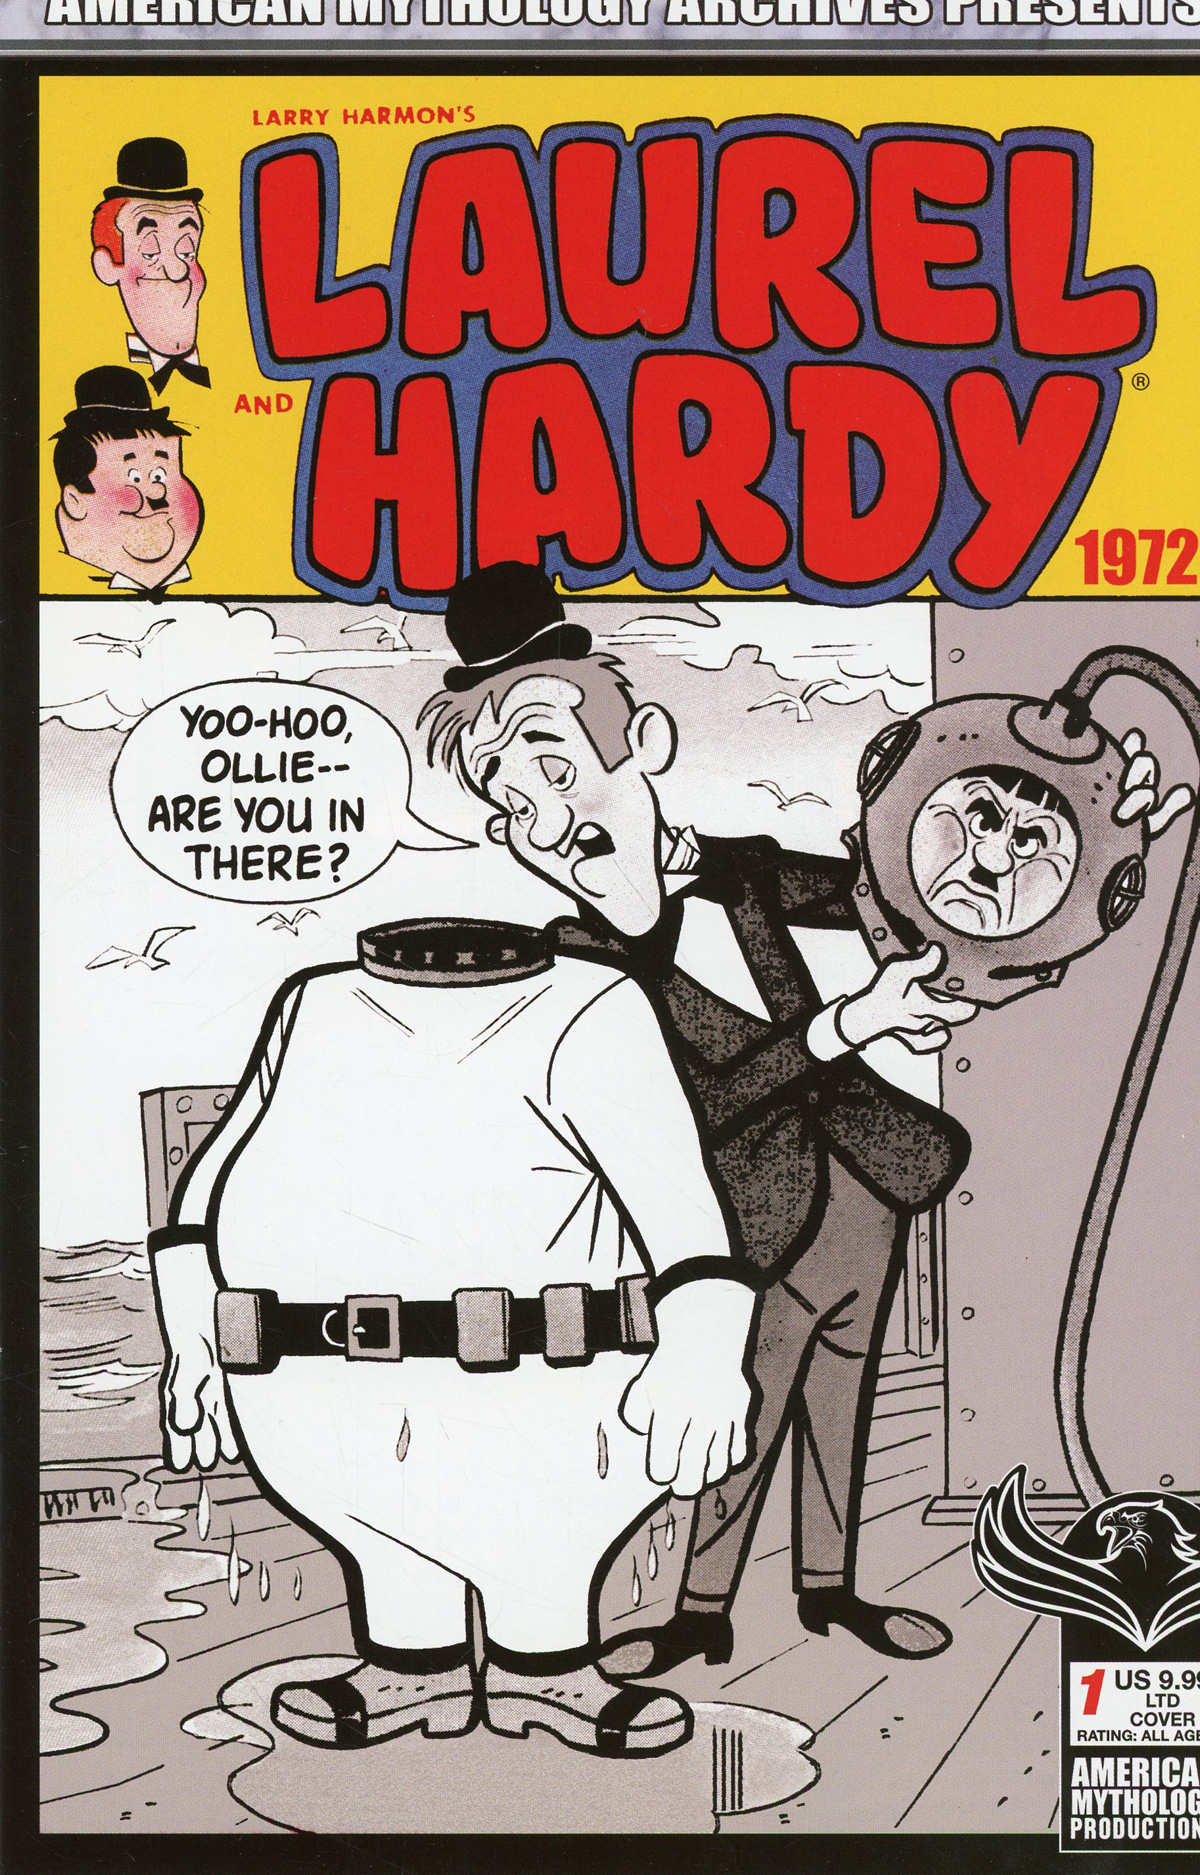 American Mythology Archives Laurel & Hardy 1972 #1 Cover B Limited Edition Cover